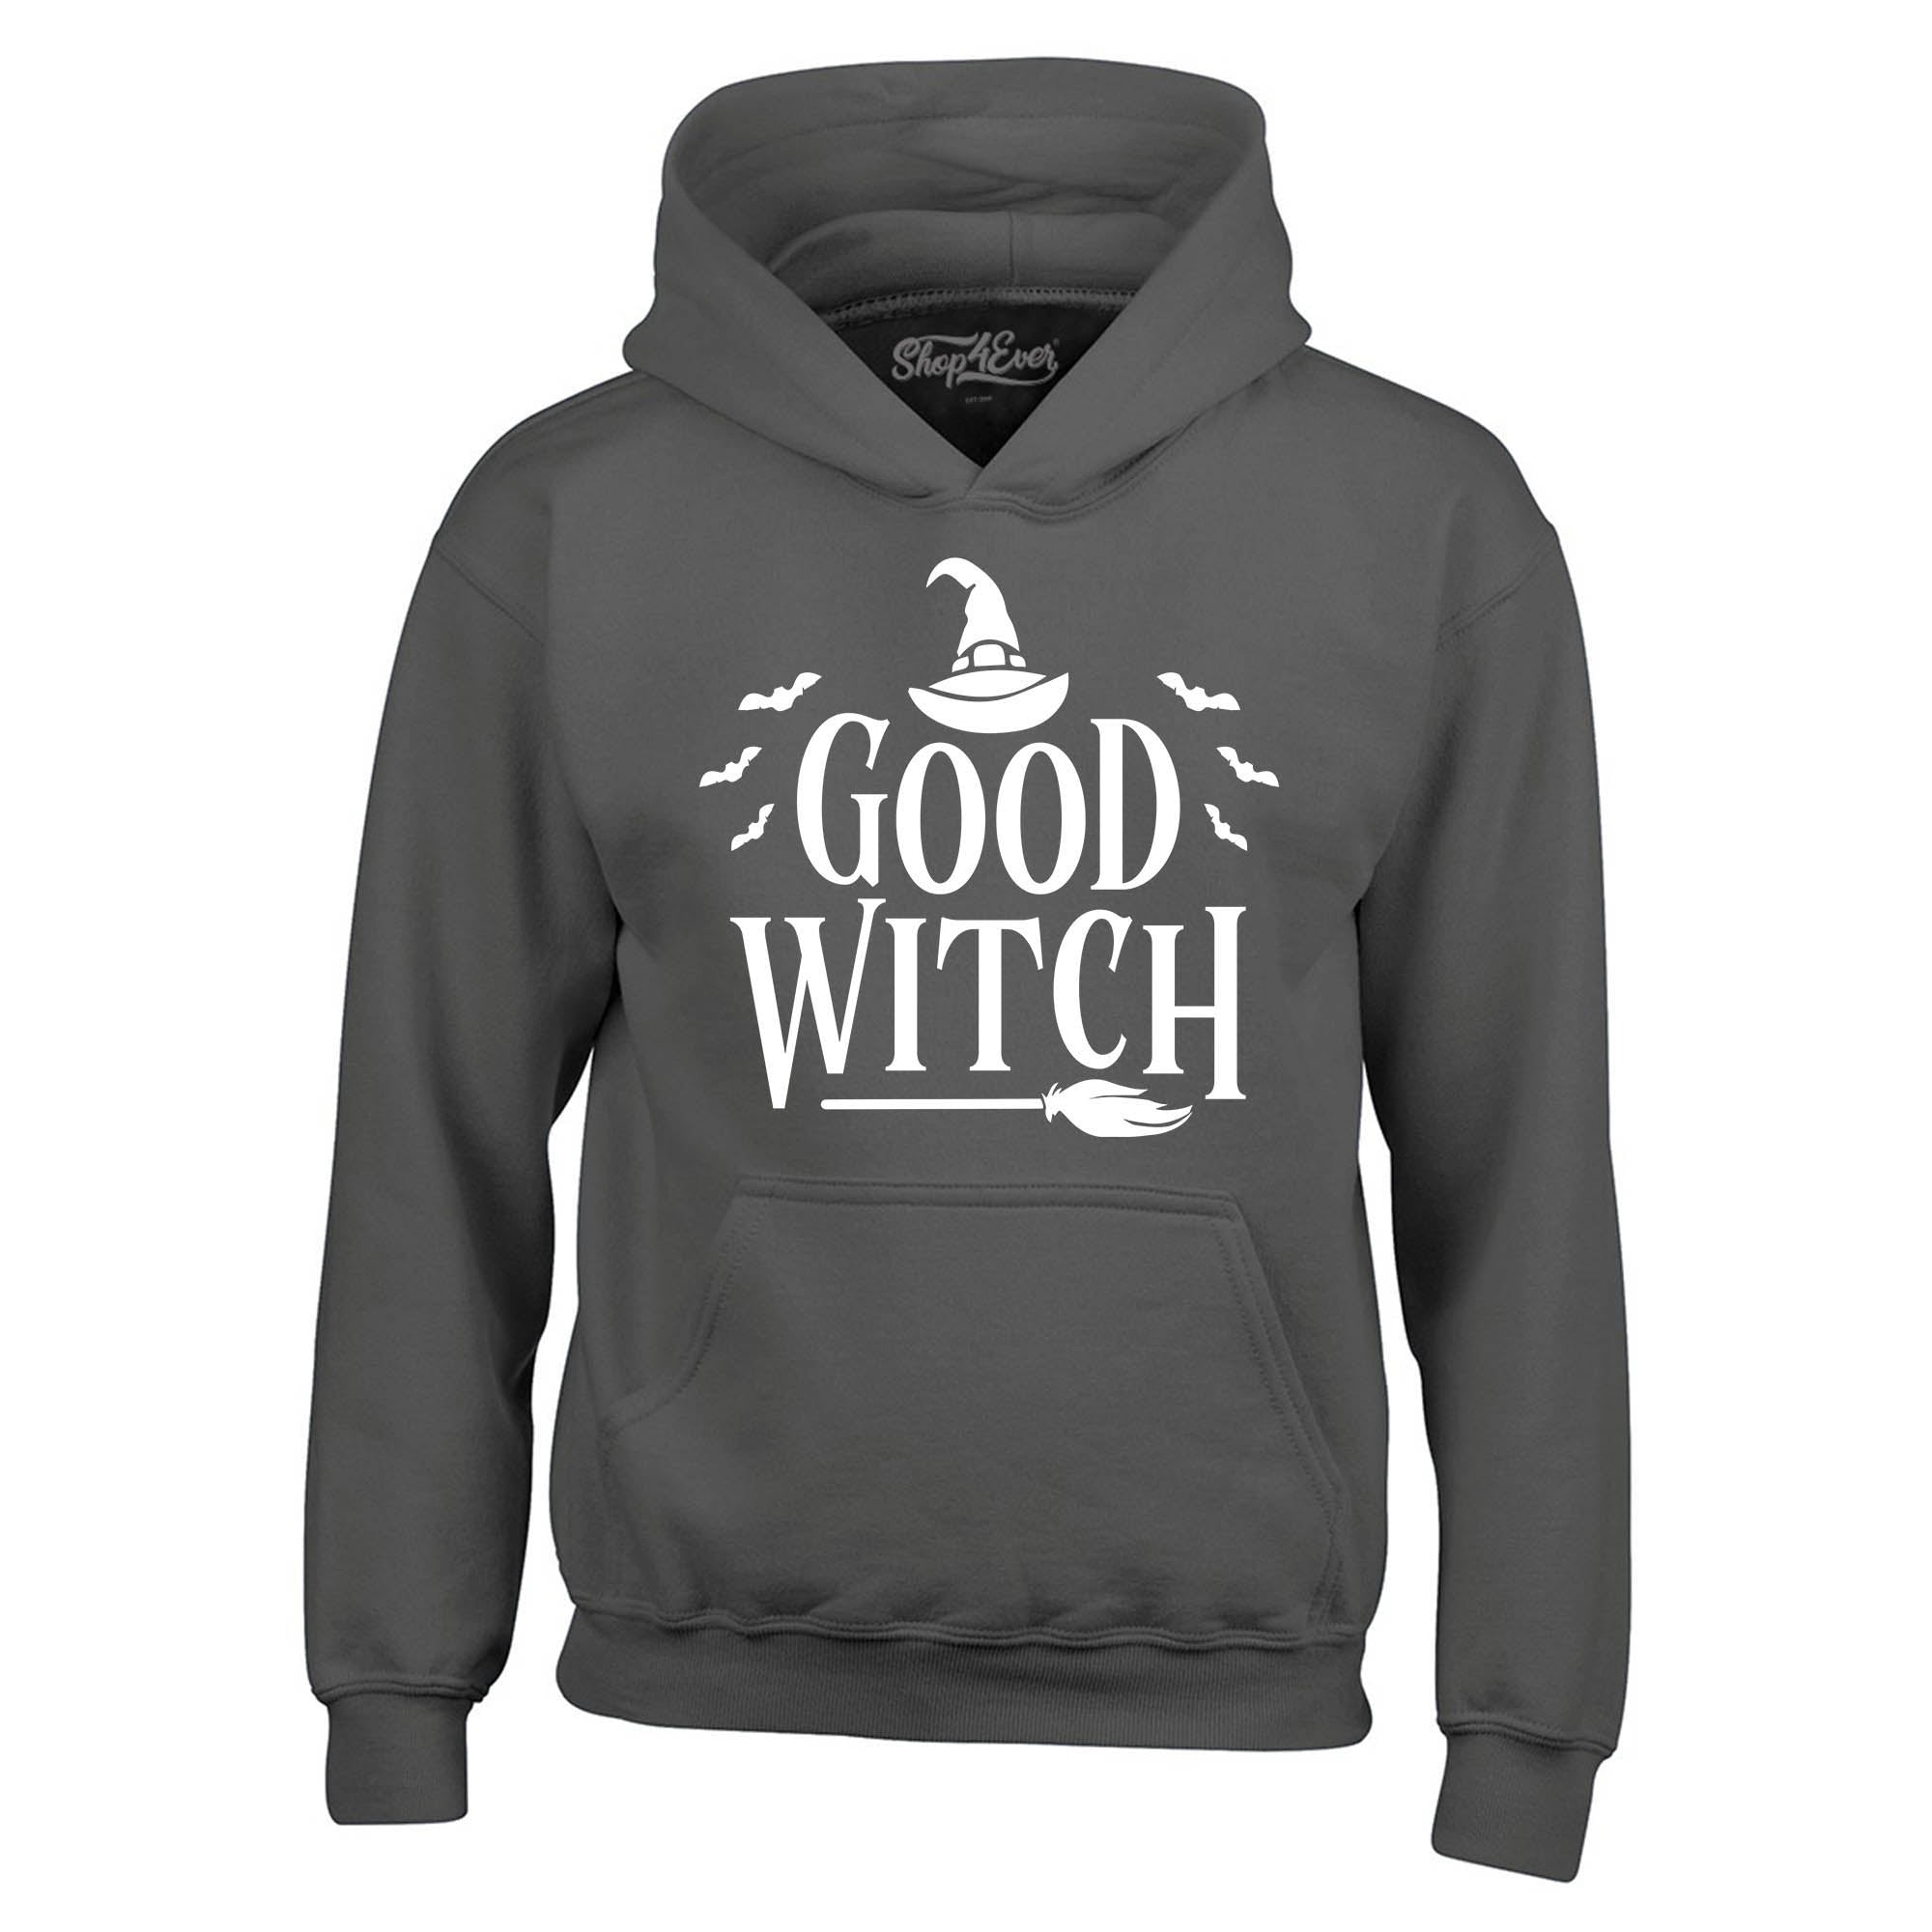 Good Witch ~ Bad Witch Matching Halloween Costumes Hoodie Sweatshirts